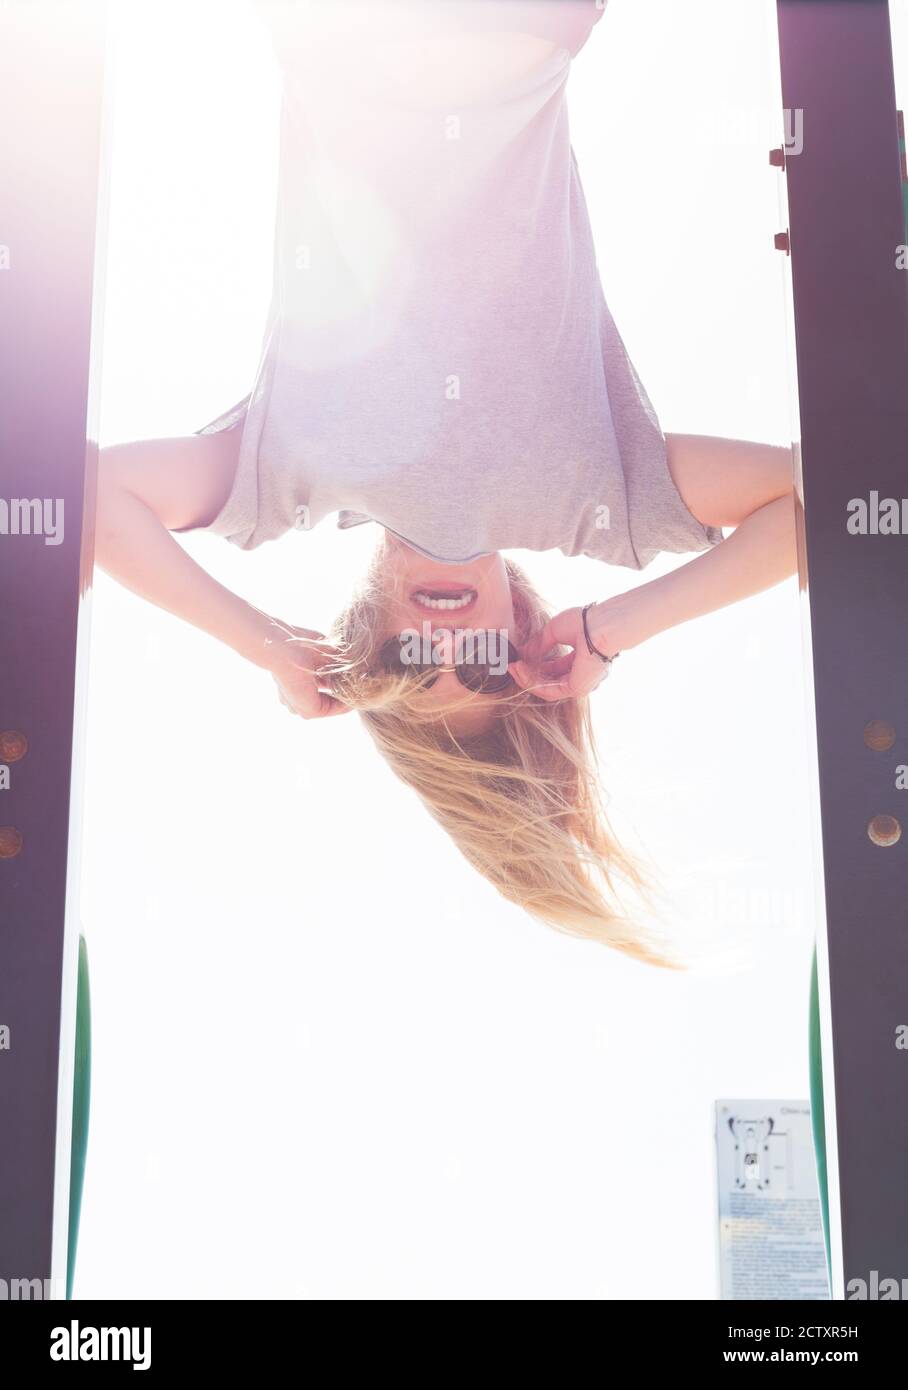 Happy female model hanging upside down at the playground wearing sunglasses. Stock Photo